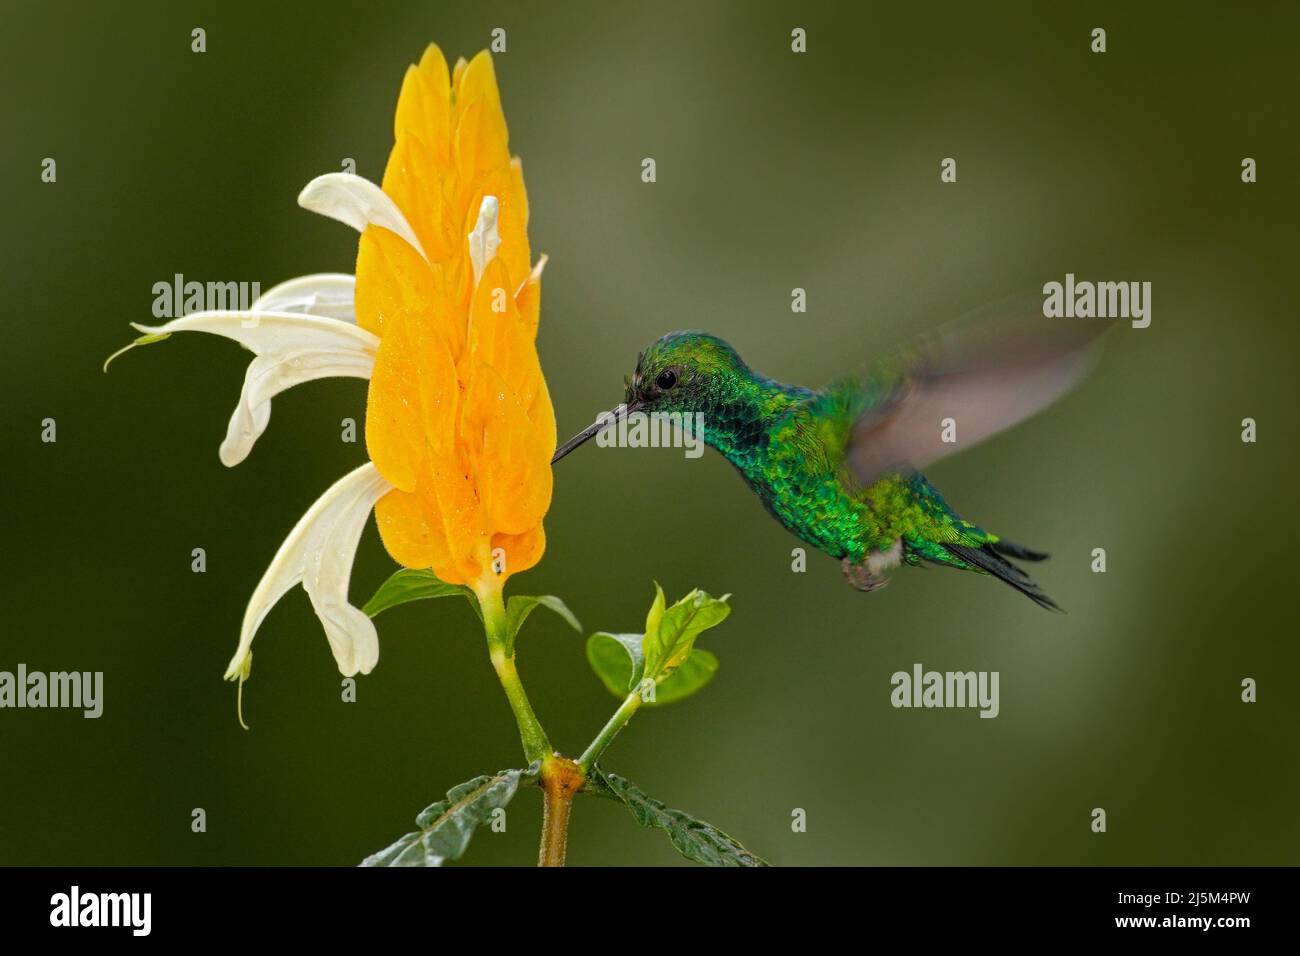 Green Hummingbird with yellow flower. Western Emerald, Chlorostilbon melanorhynchus, hummingbird in the Colombia tropic forest, blue an green glossy b Stock Photo